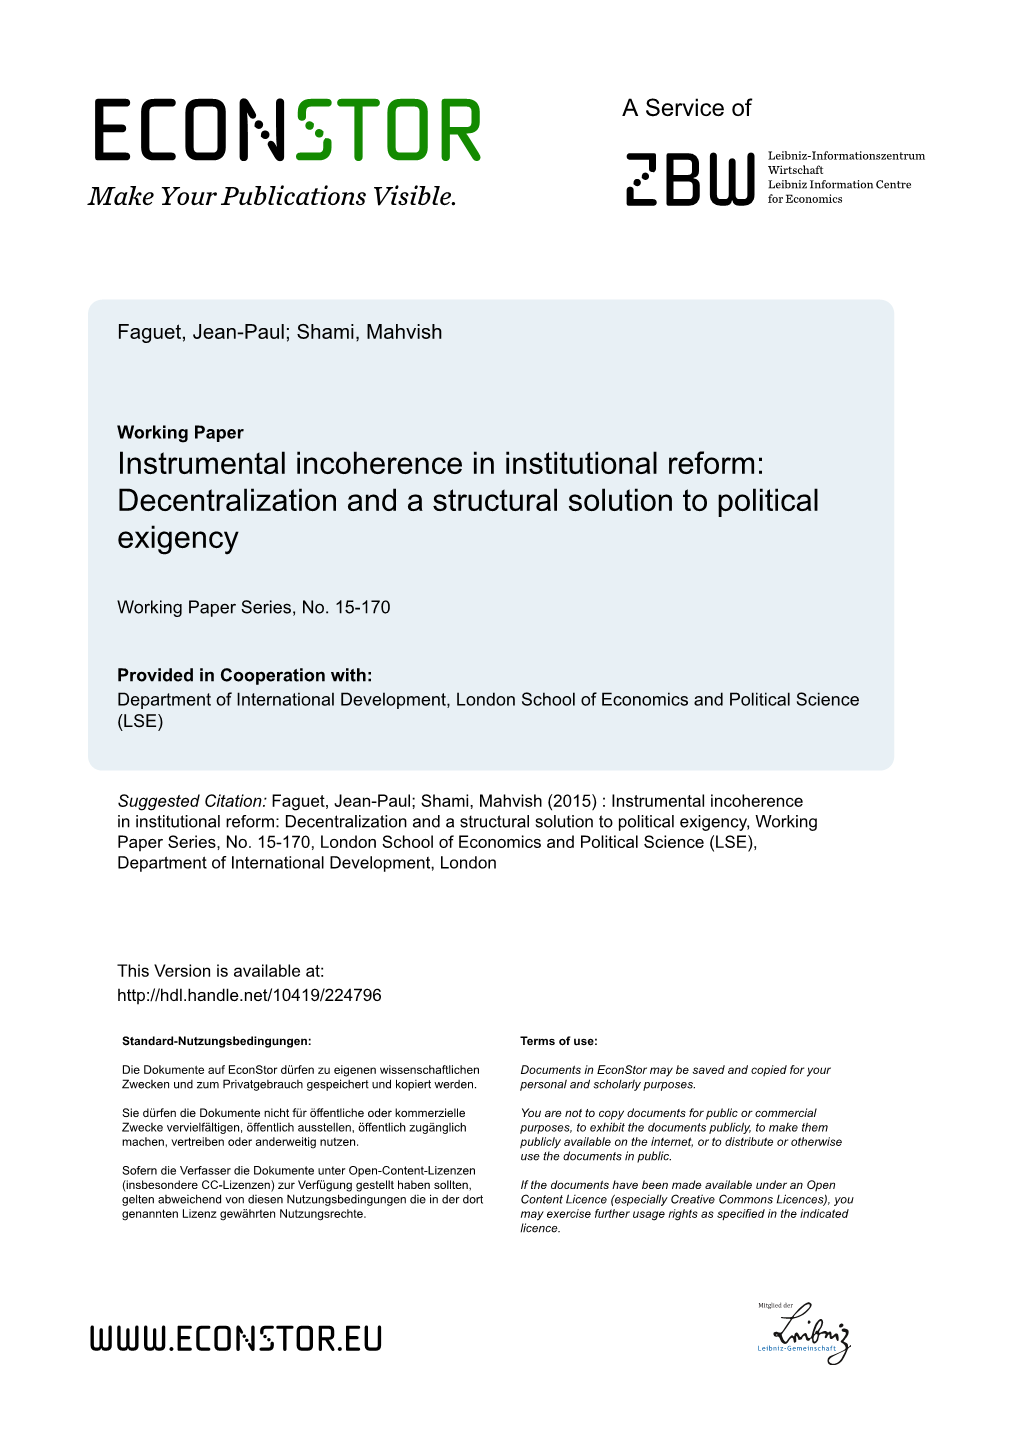 Instrumental Incoherence in Institutional Reform: Decentralization and a Structural Solution to Political Exigency